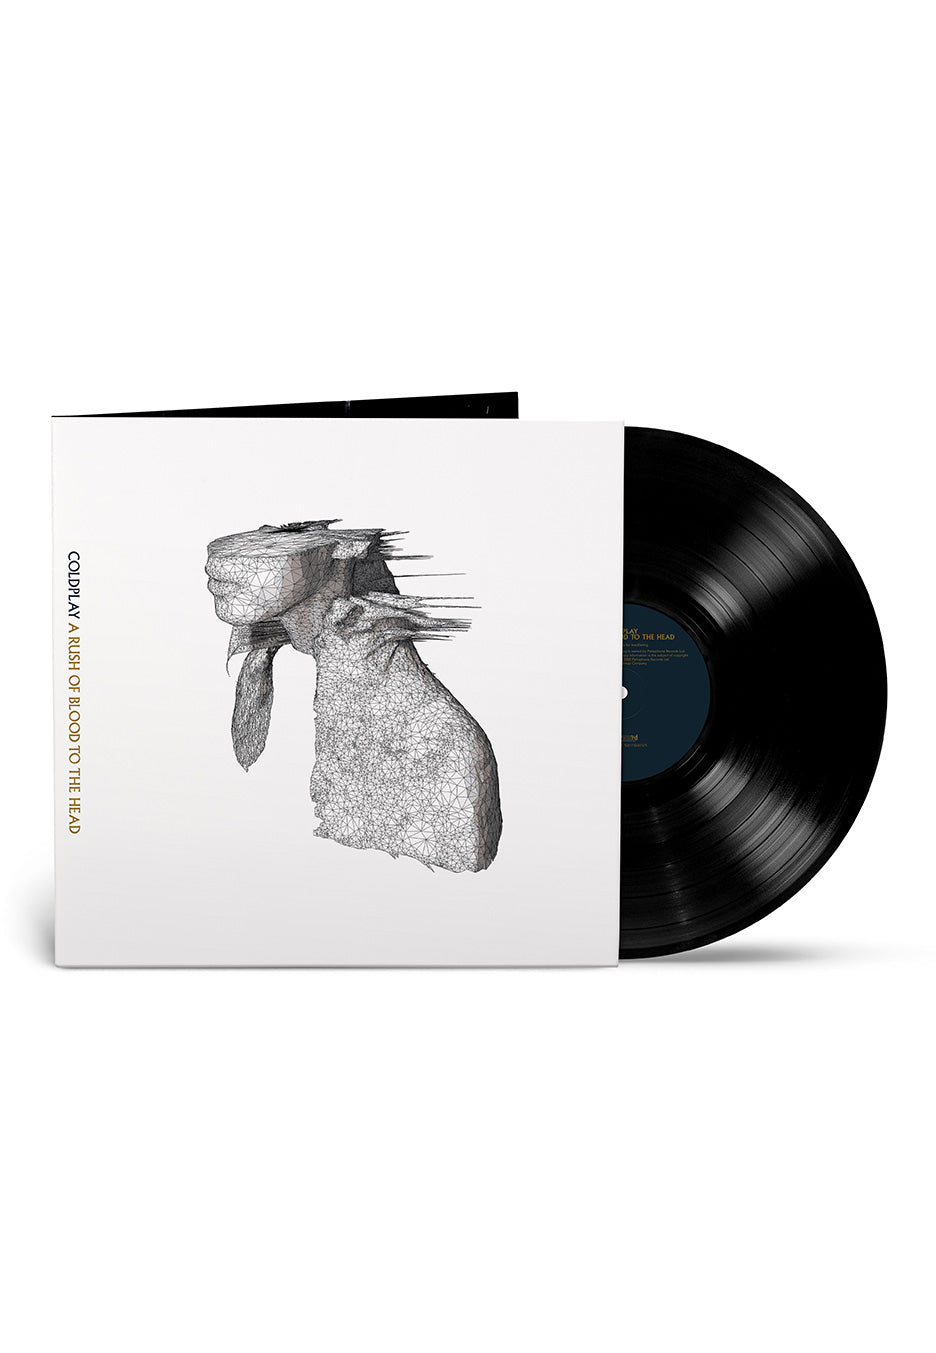 Coldplay - A Rush Of Blood To The Head Ltd. Black Eco - Vinyl | Neutral-Image